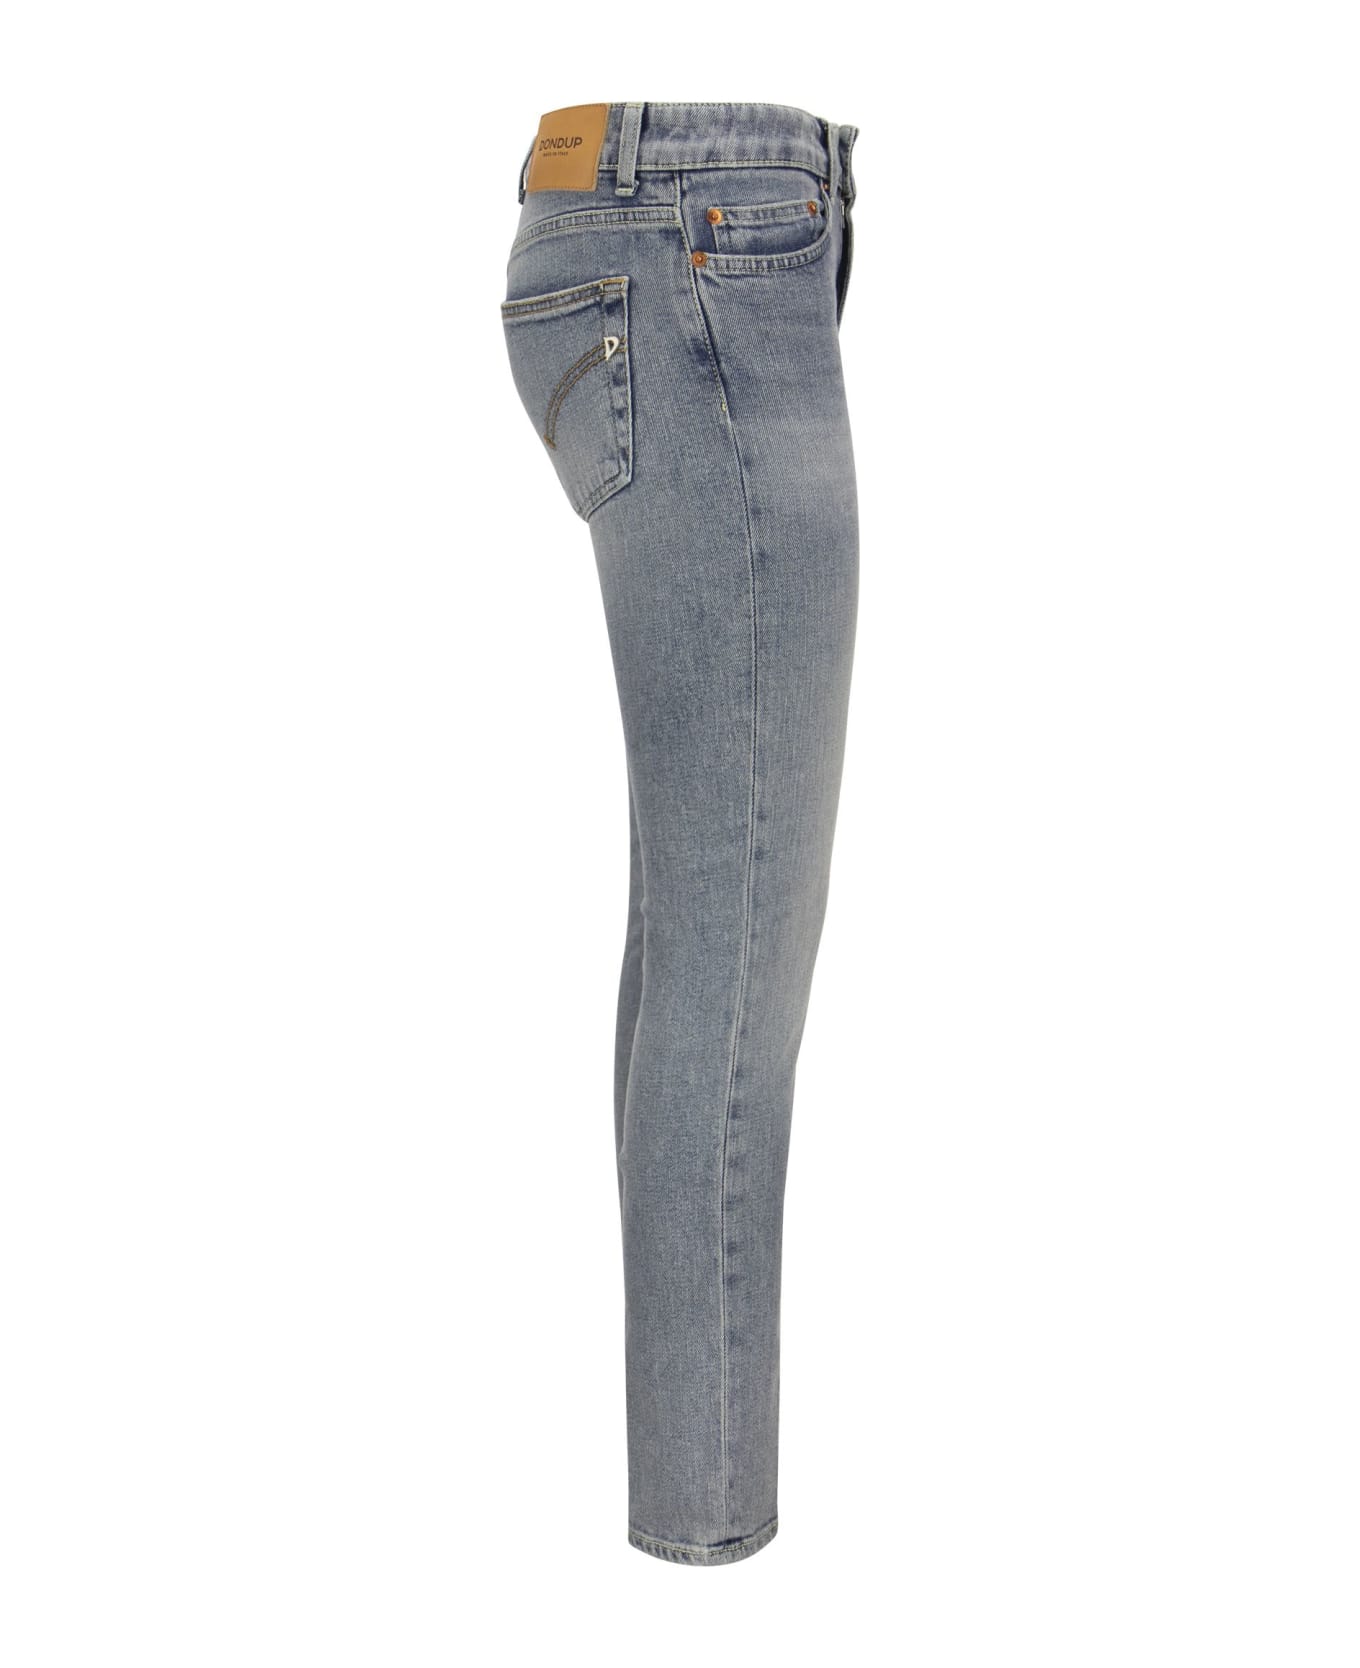 Dondup Marilyn - Jeans Skinny Fit - Blue